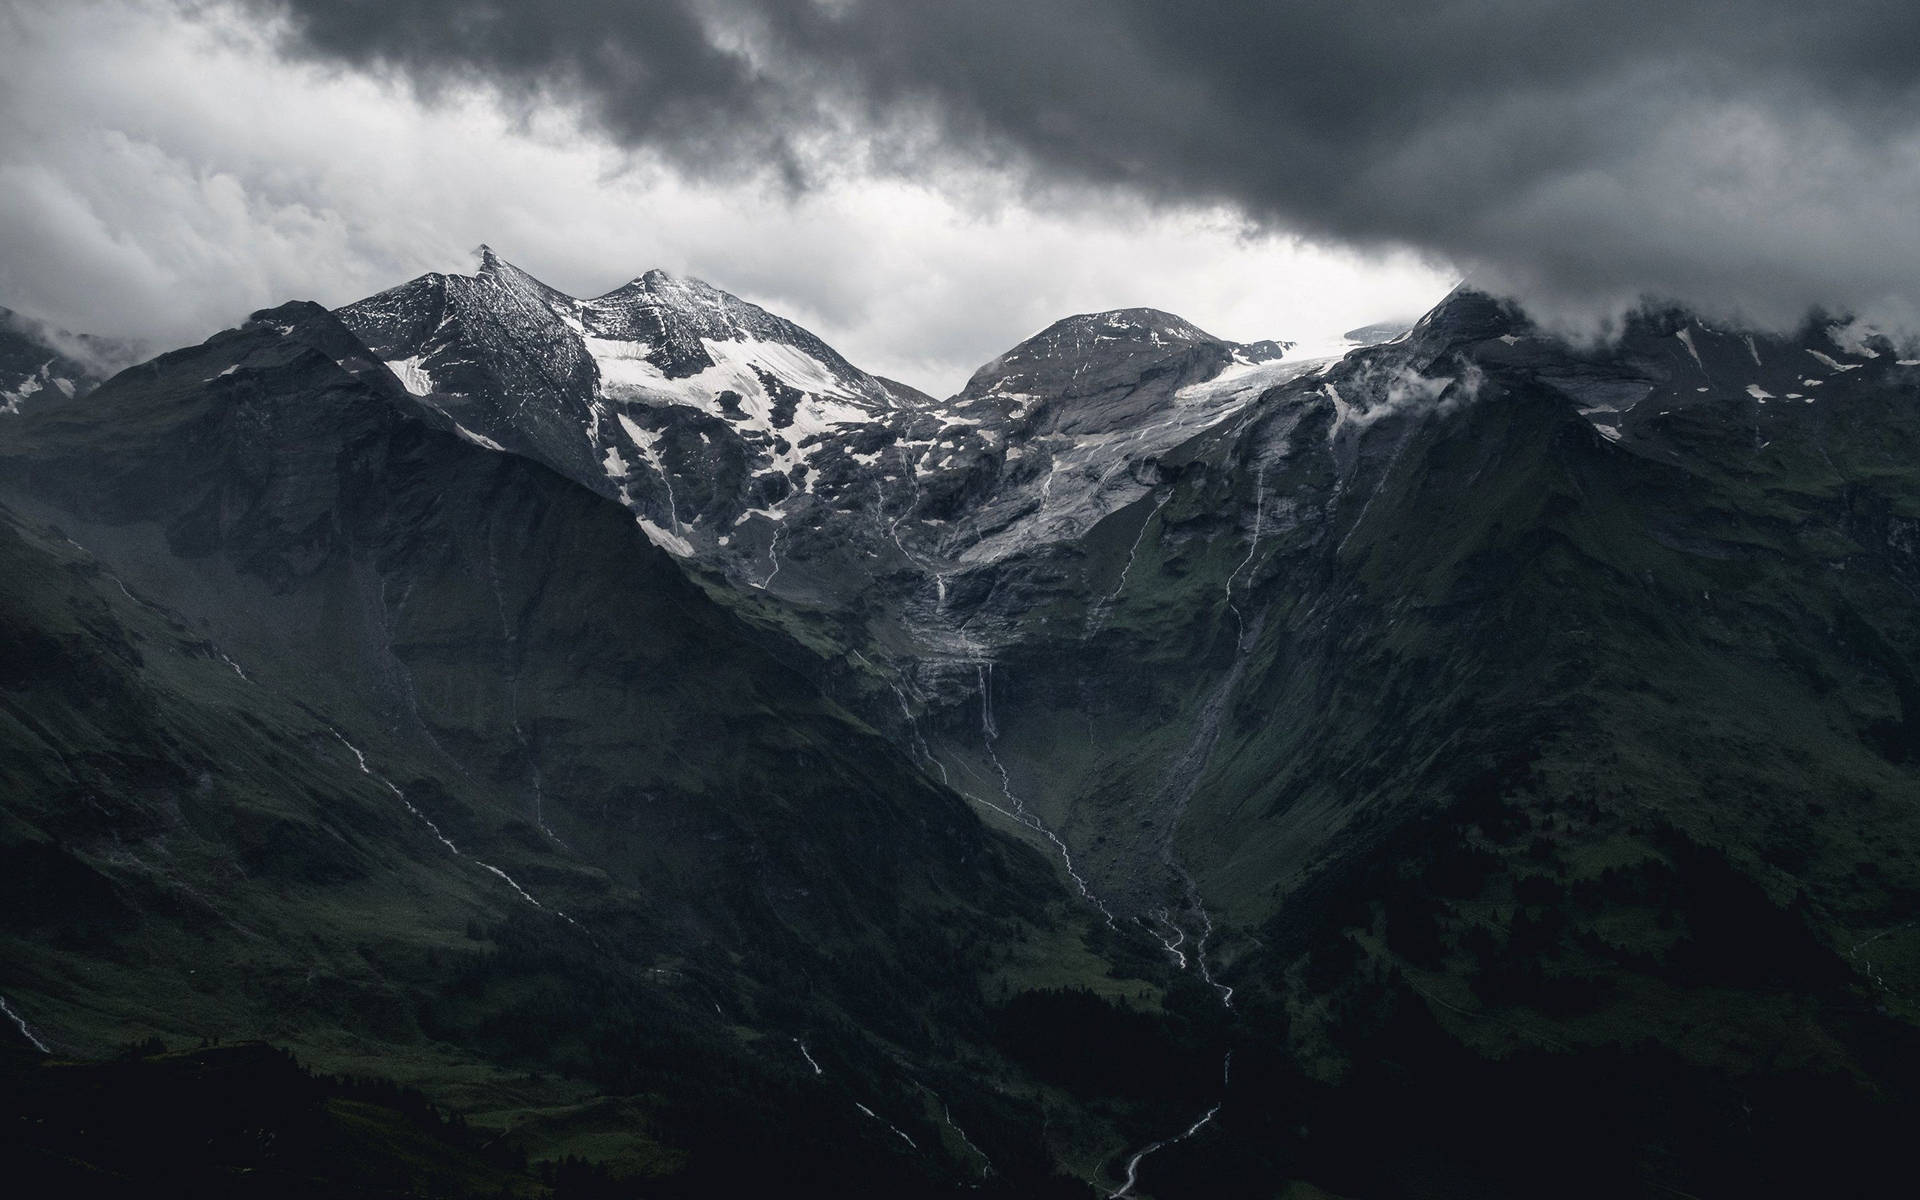 Brave the Elements with this Snow-Capped Mountain Wallpaper